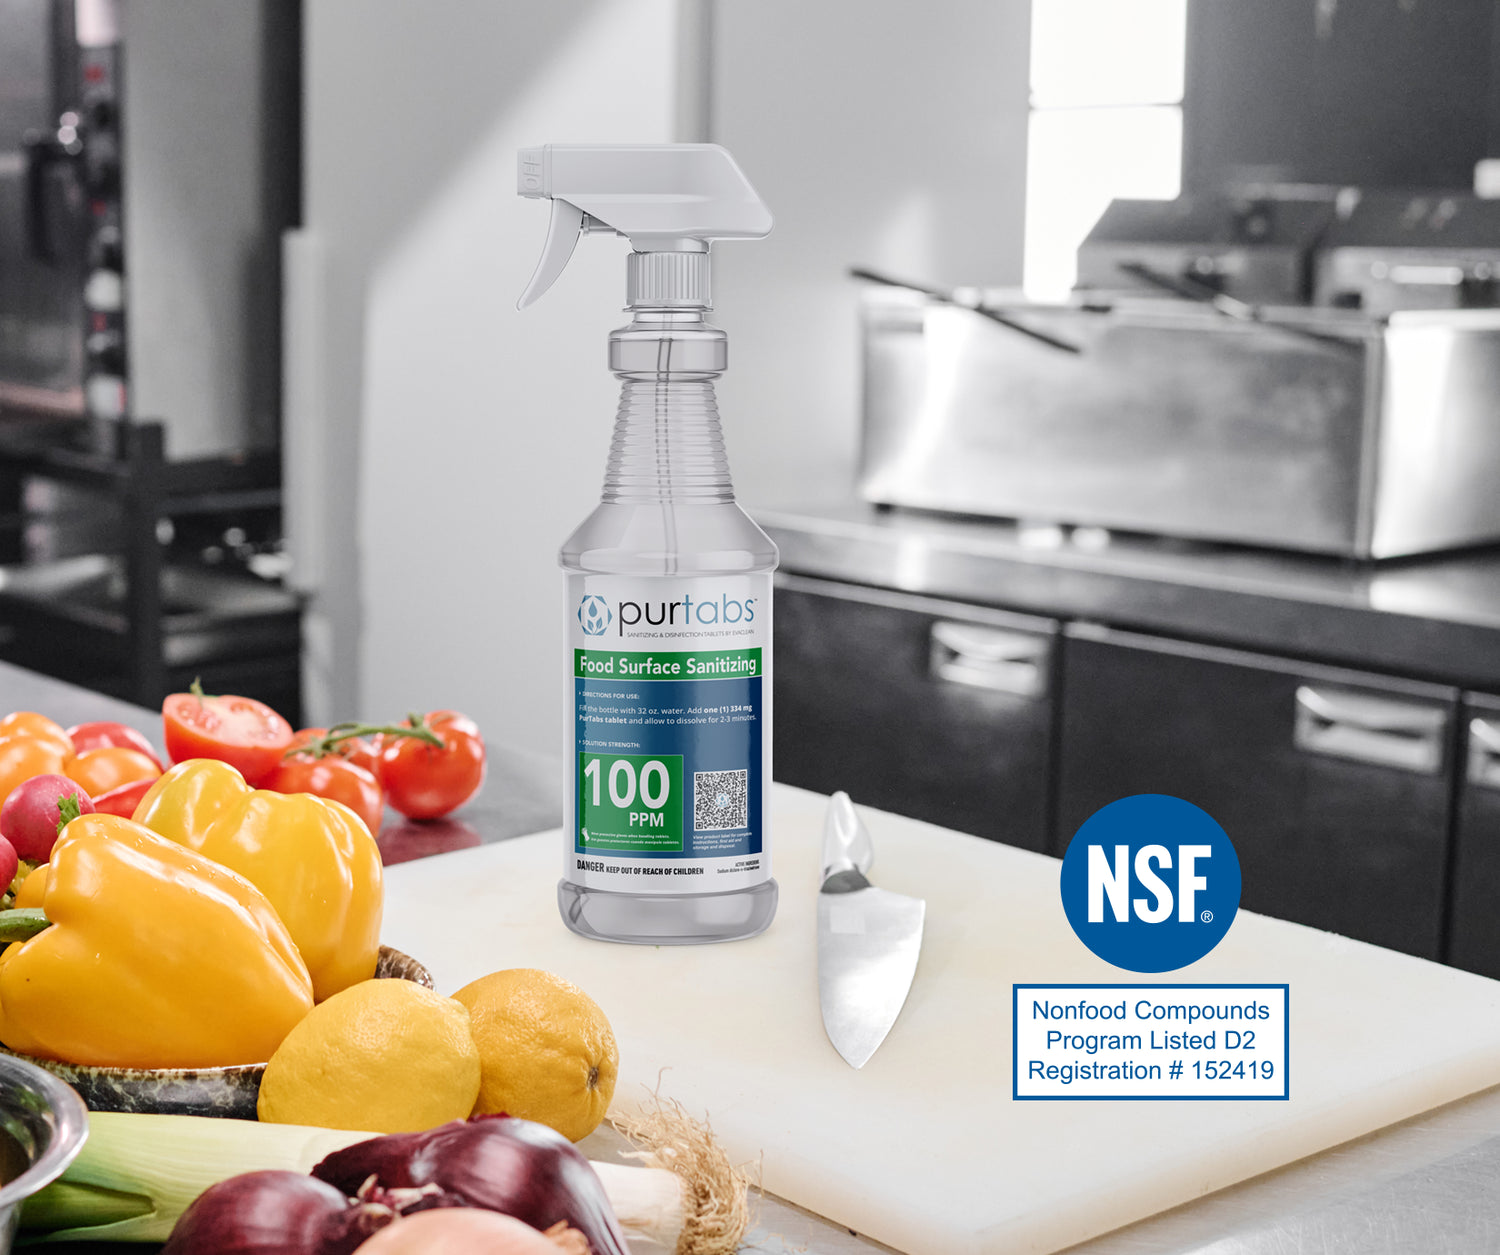 spray bottle of PurTabs on food prep counter in kitchen with NSF D2 logo